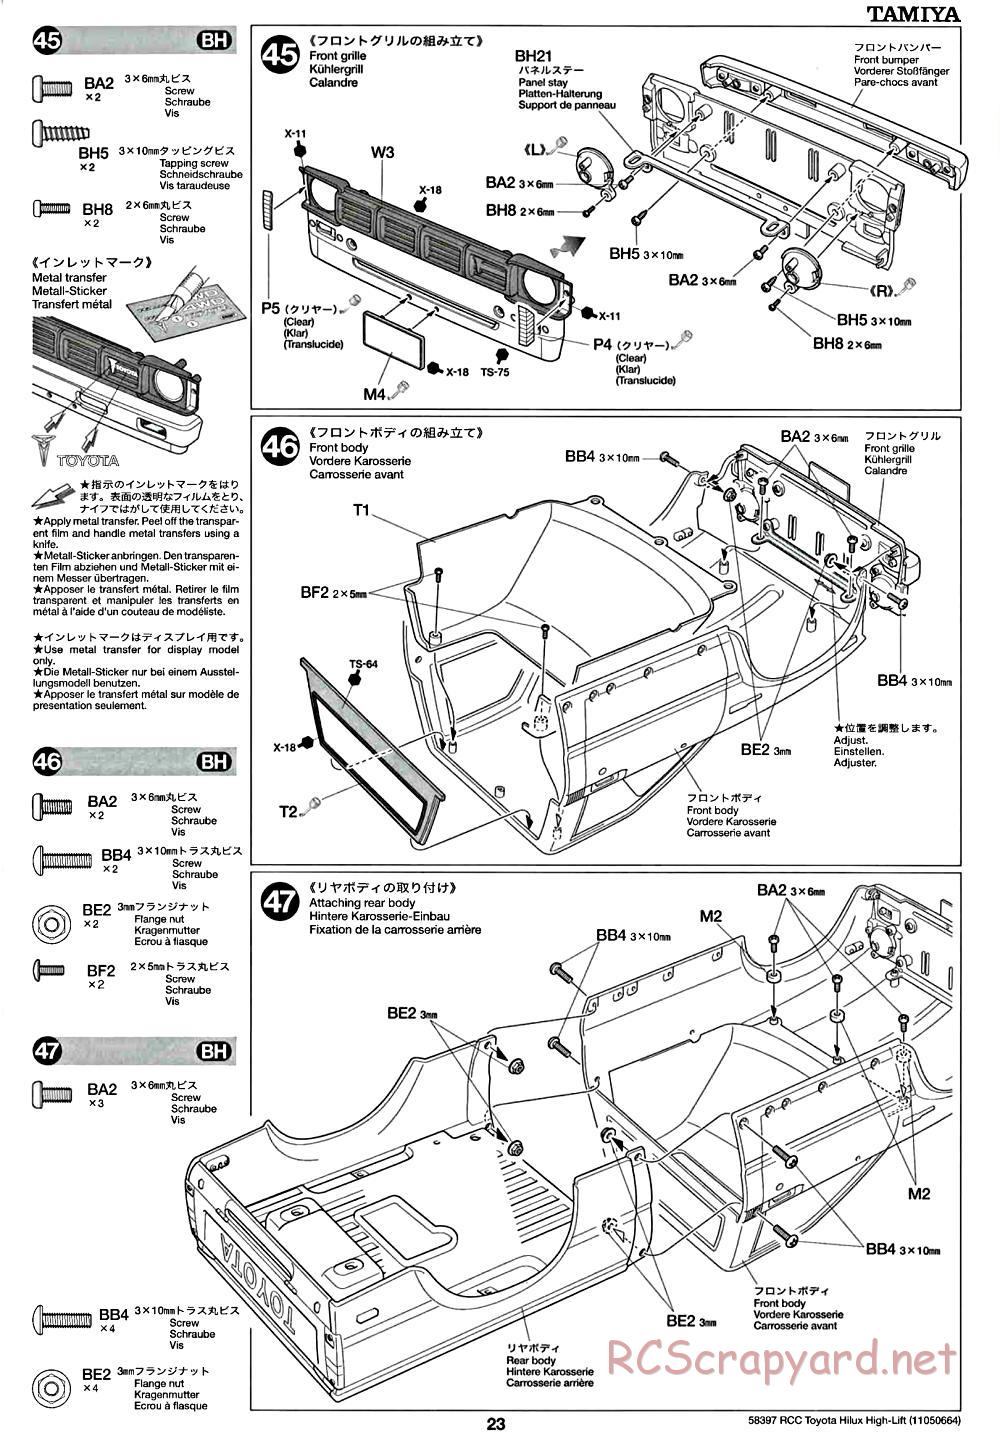 Tamiya - Toyota Hilux High-Lift Chassis - Manual - Page 23